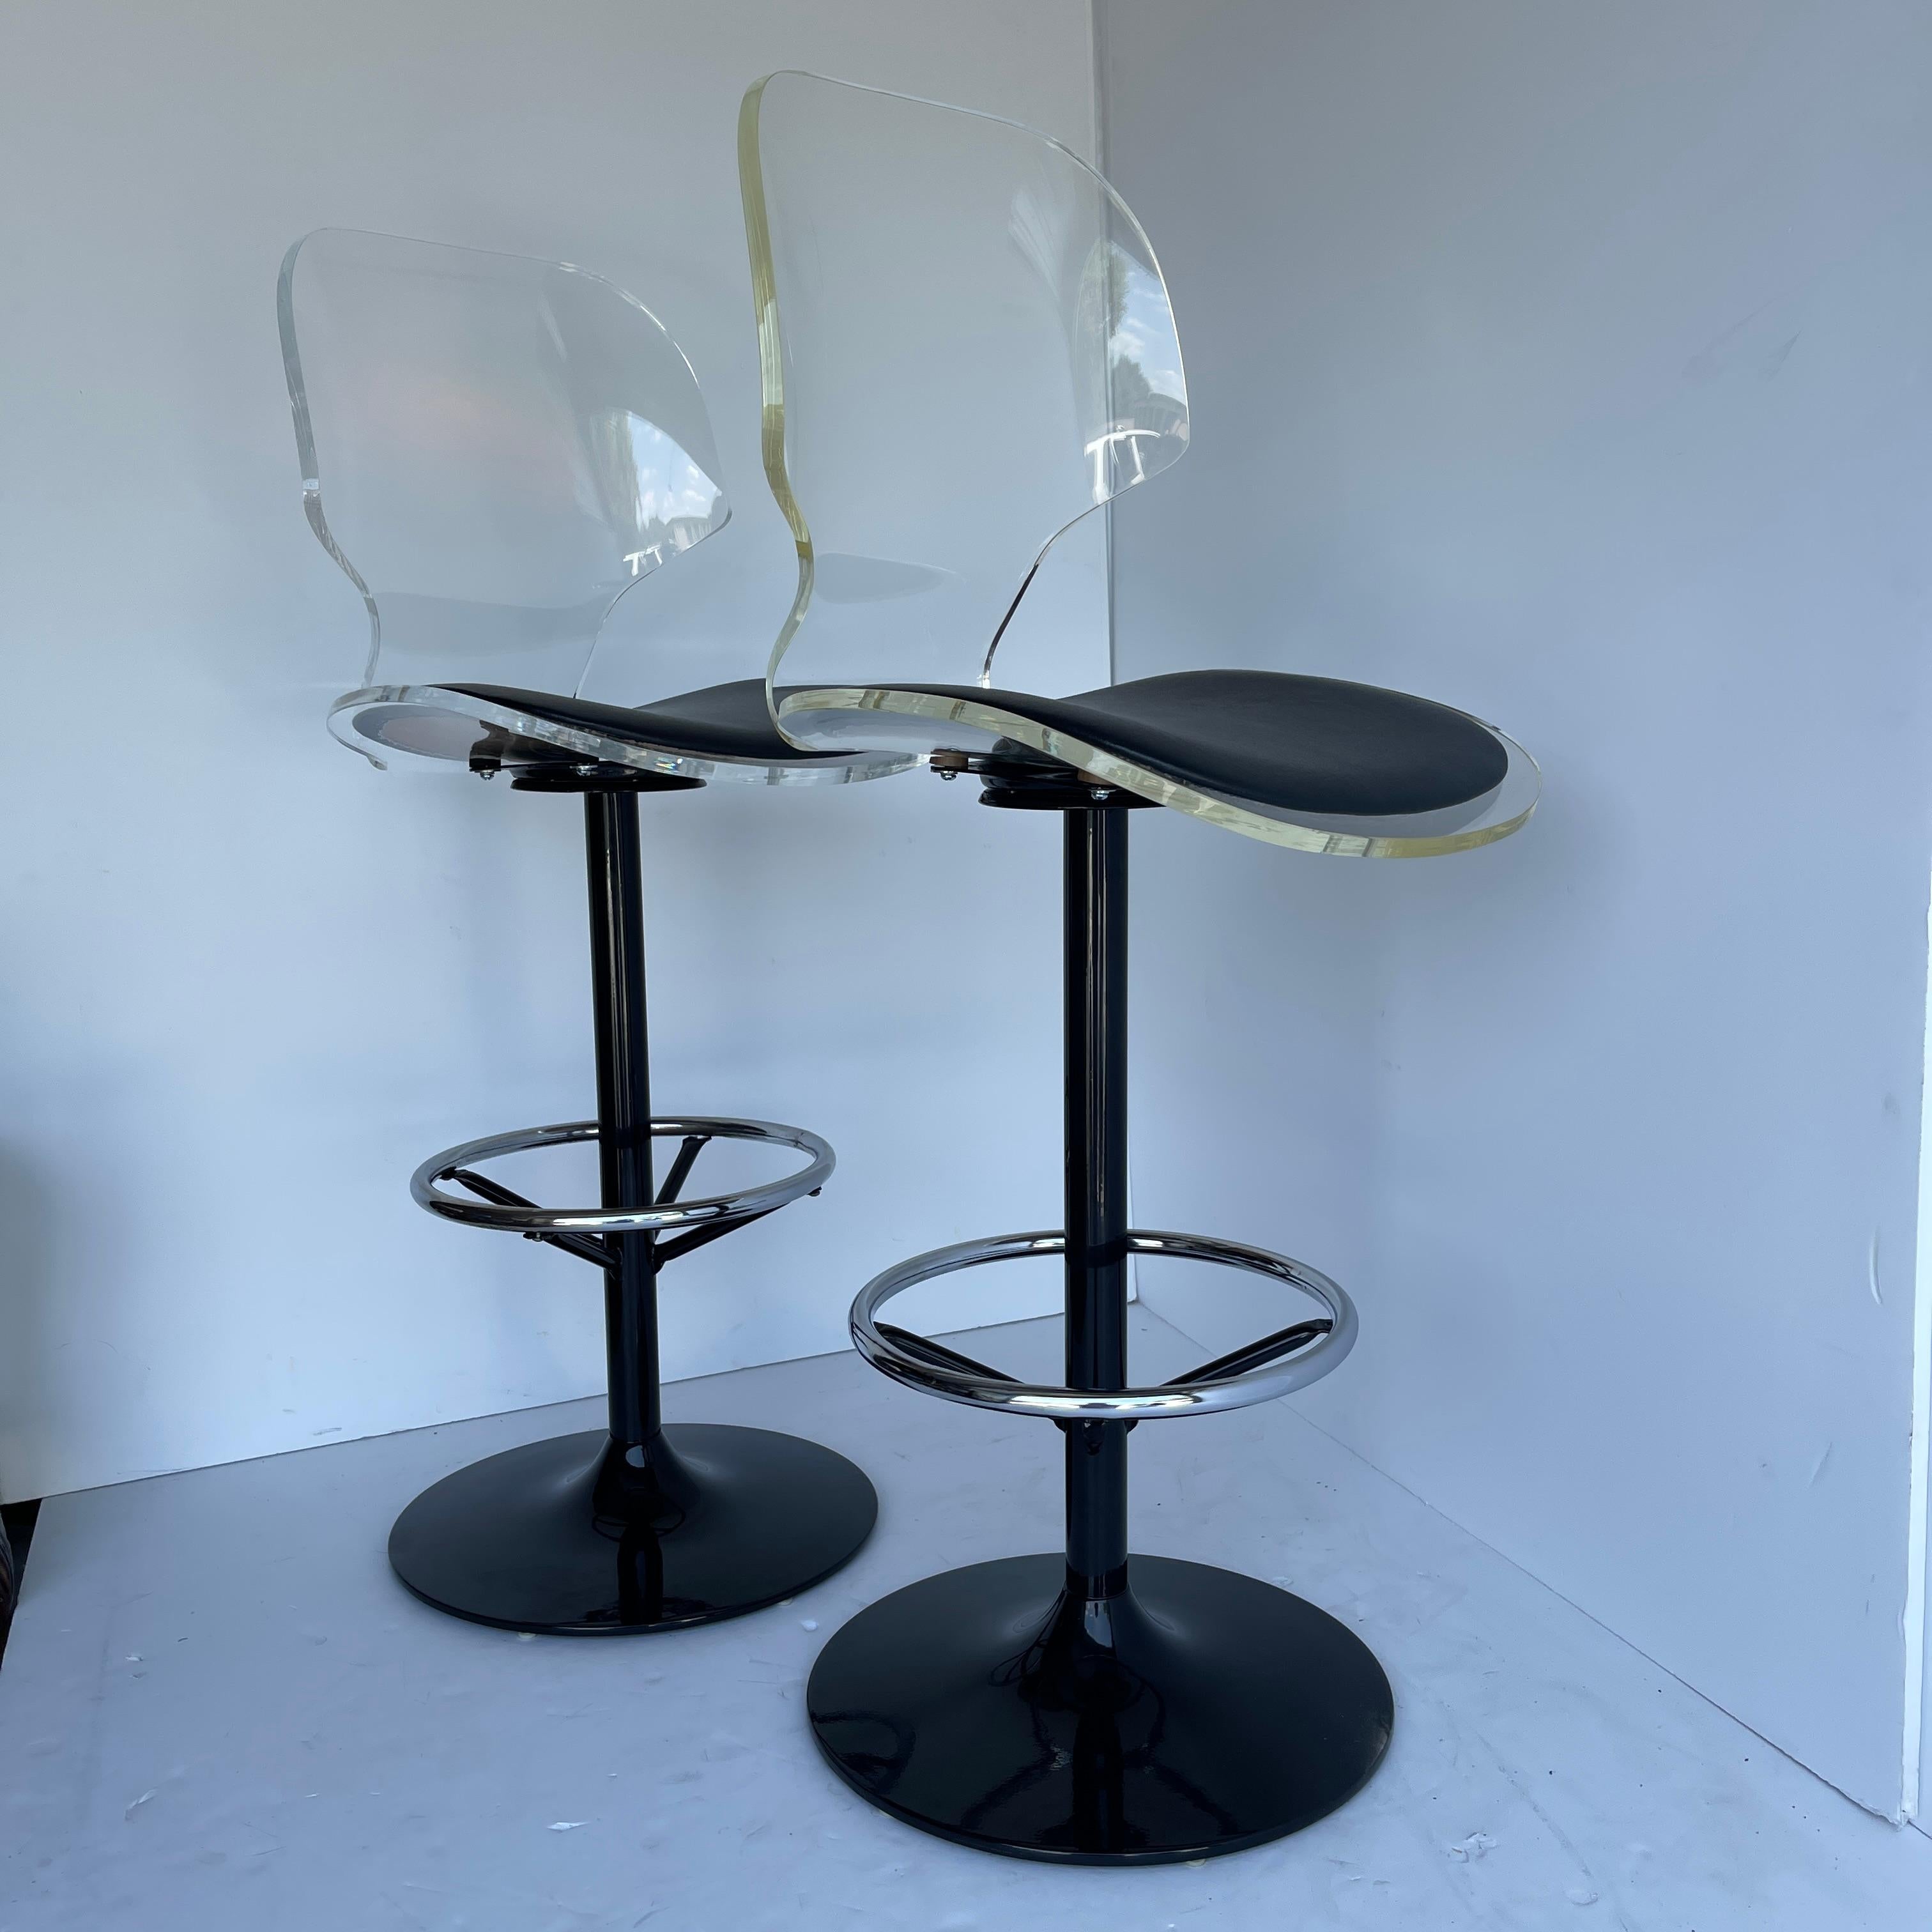 Pair of Vintage Lucite and Black-Painted Swivel Barstools In Good Condition For Sale In Haddonfield, NJ